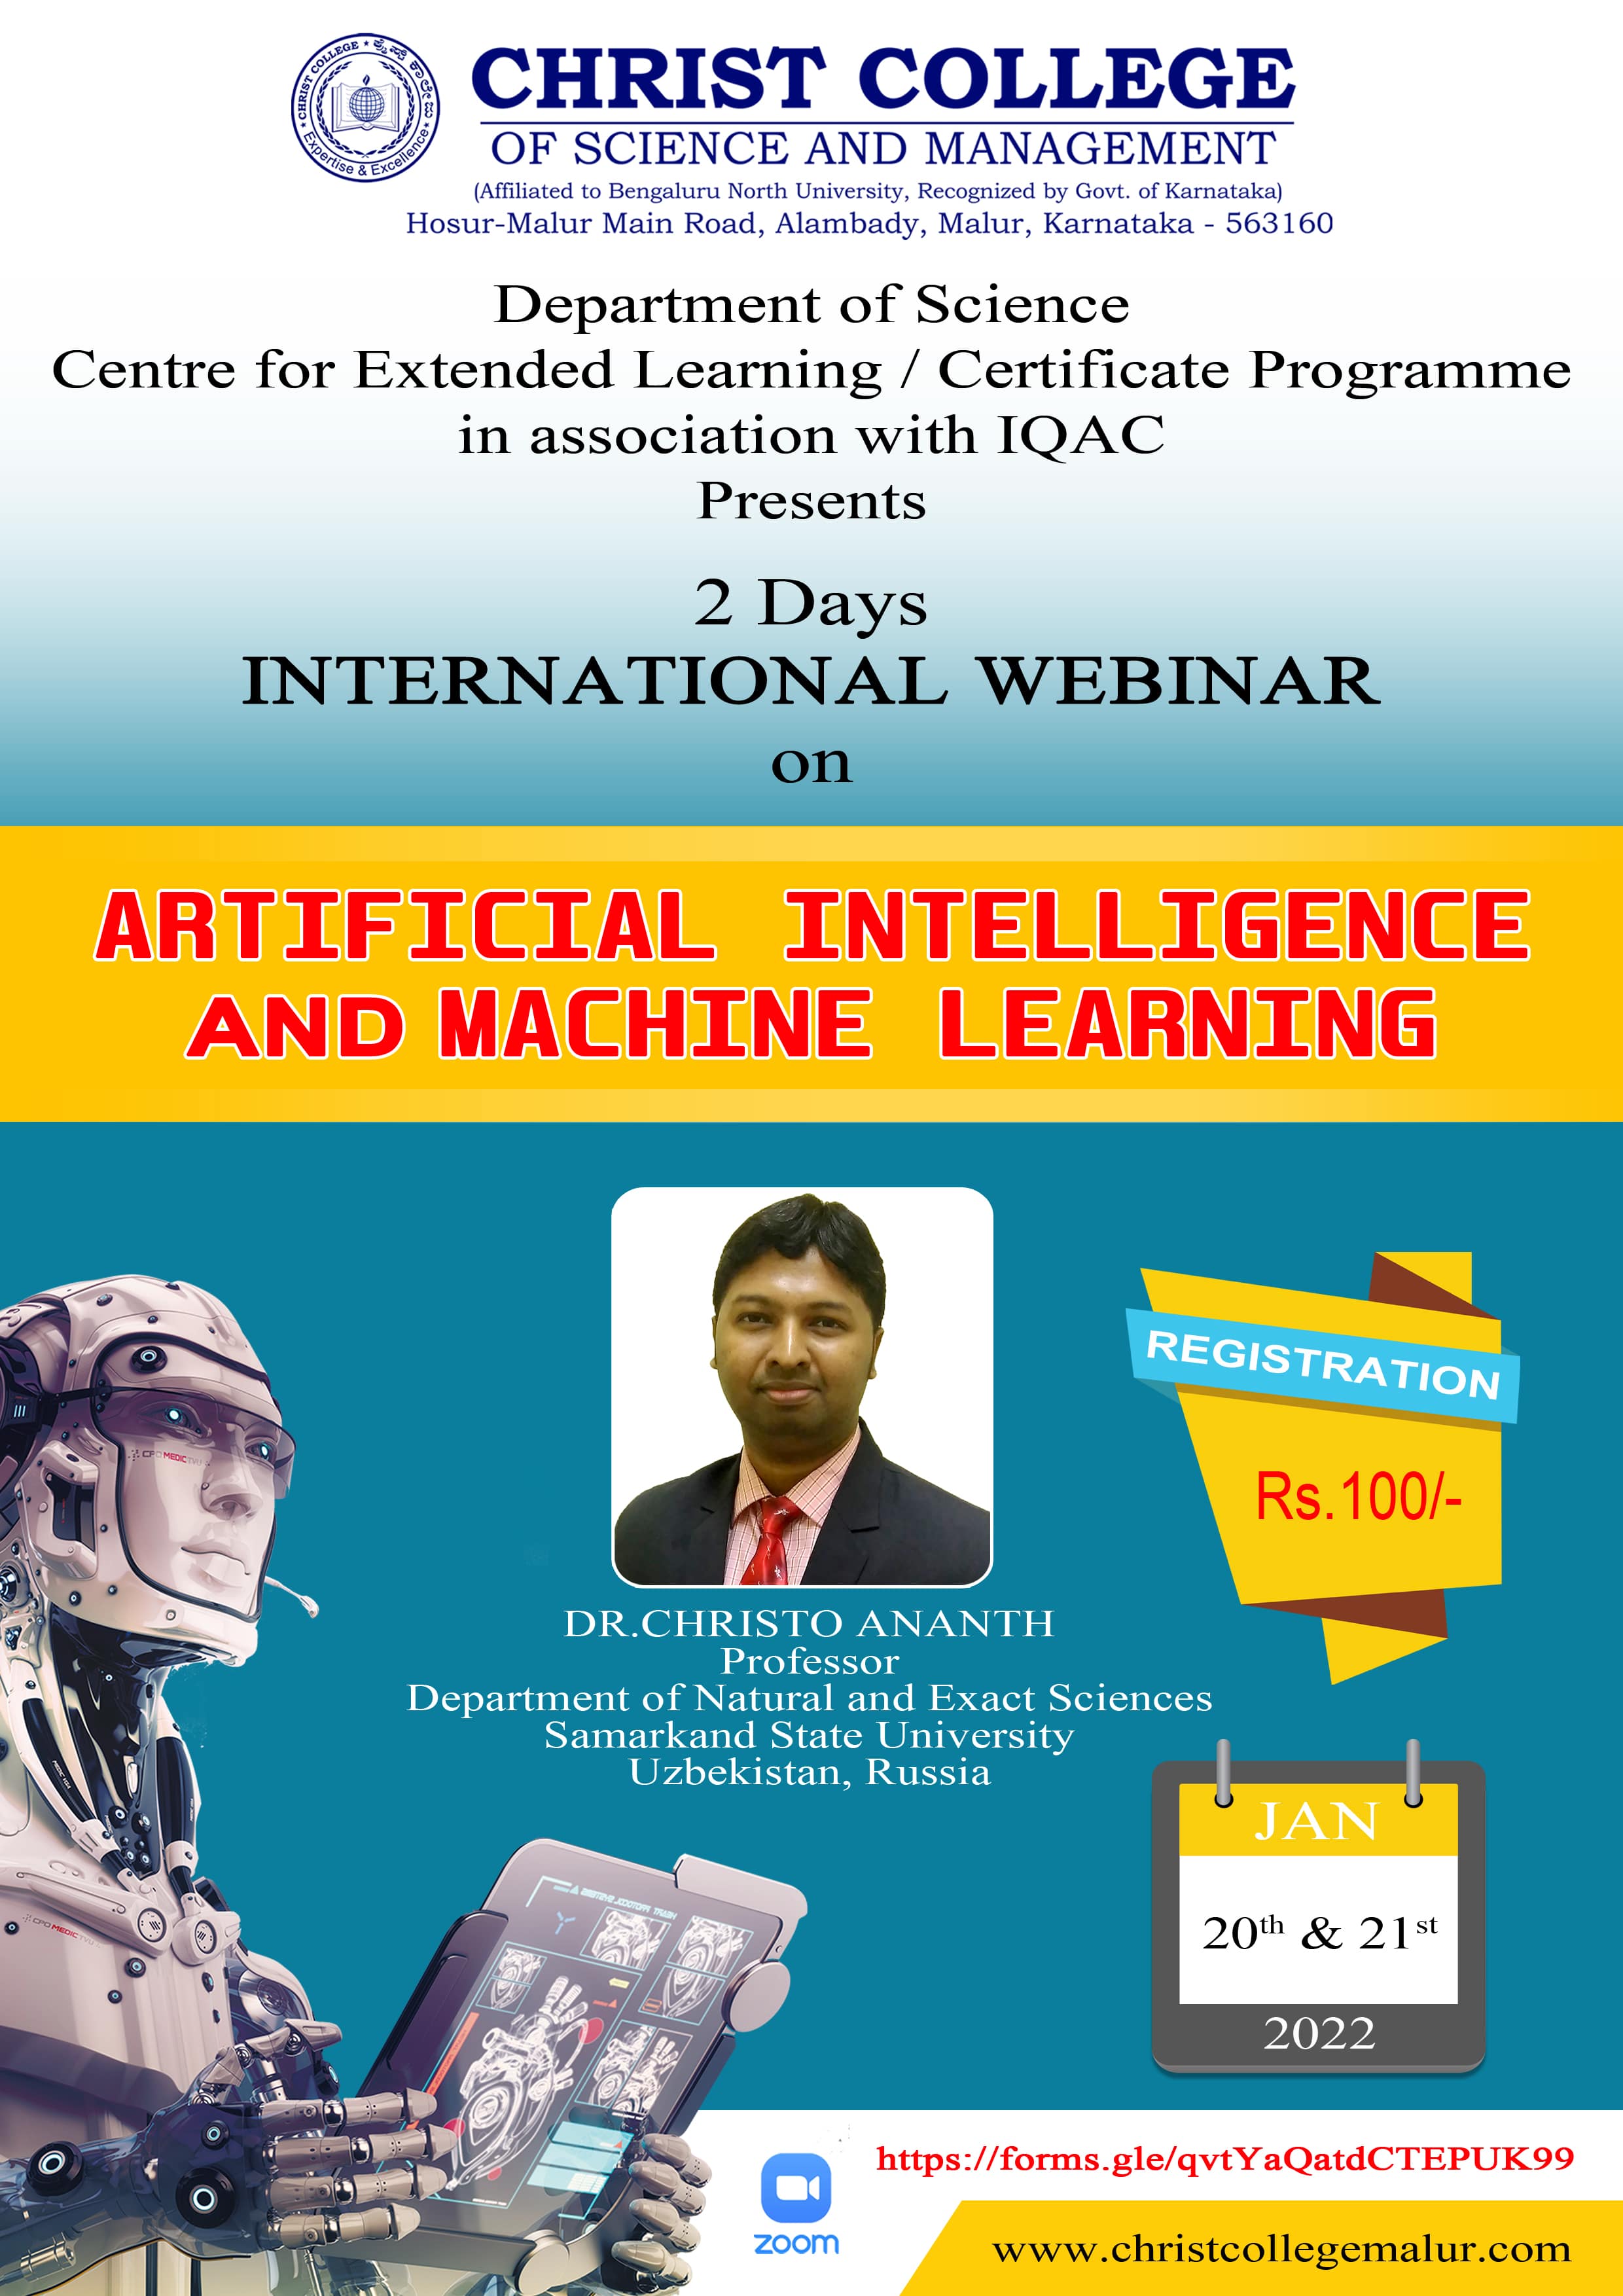 Two Days International Online Webinar on Artificial intelligence and Machine Learning 2022